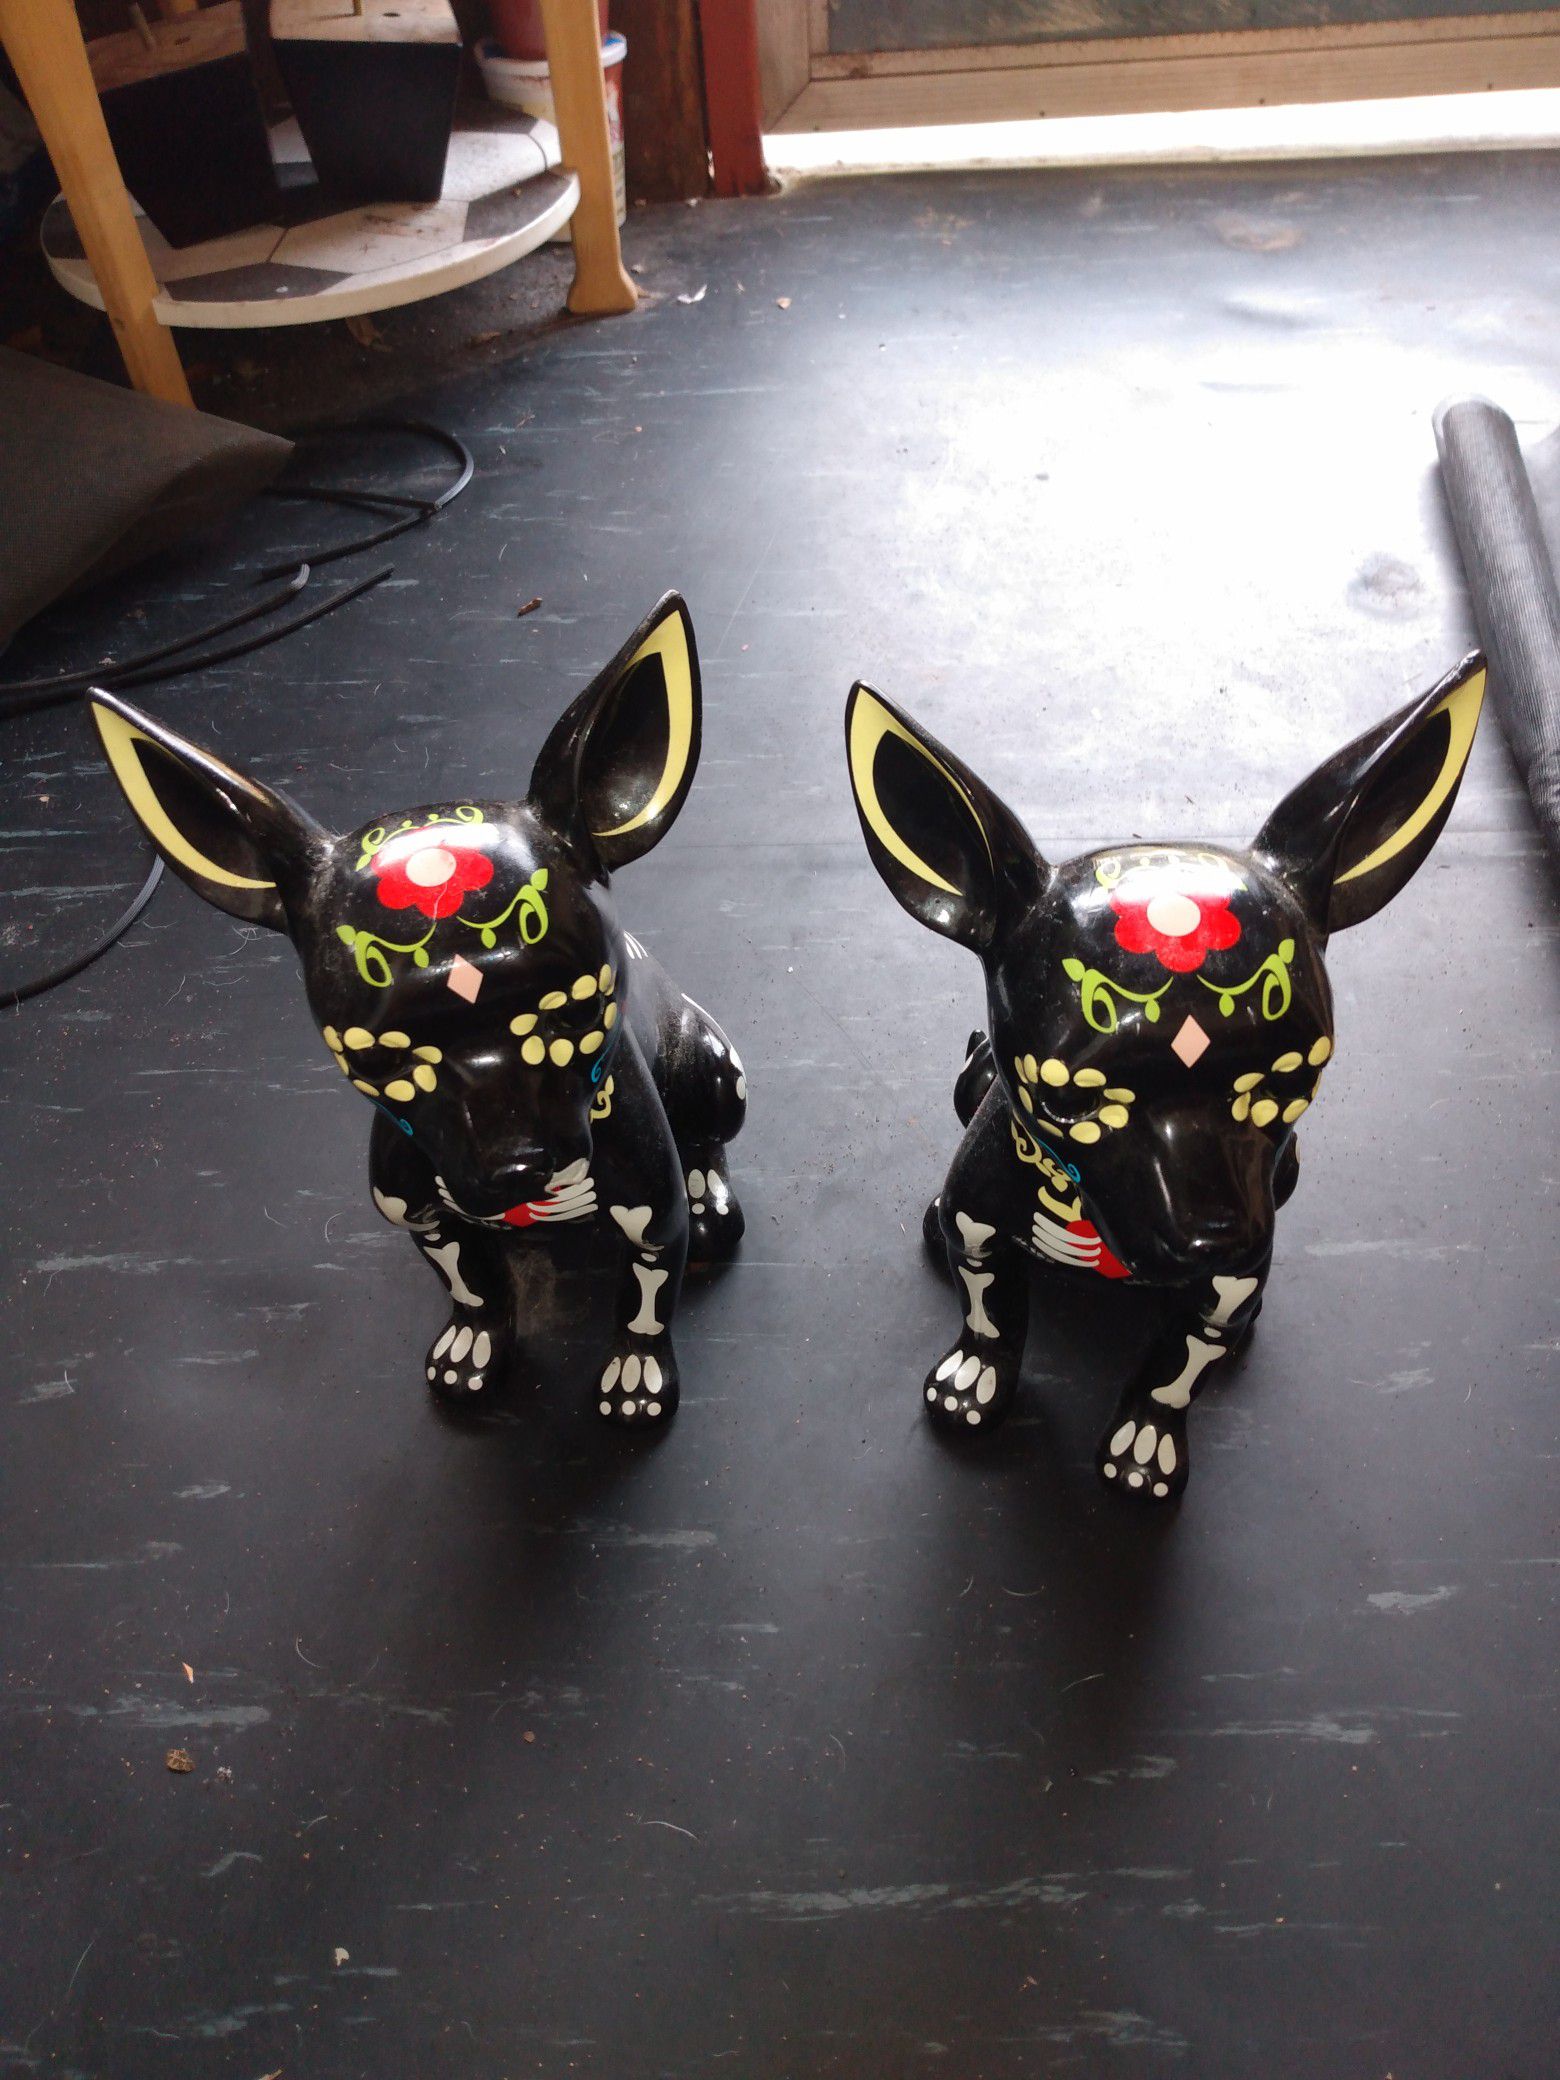 SugarSkull Chihuahua Statues (Collectables)